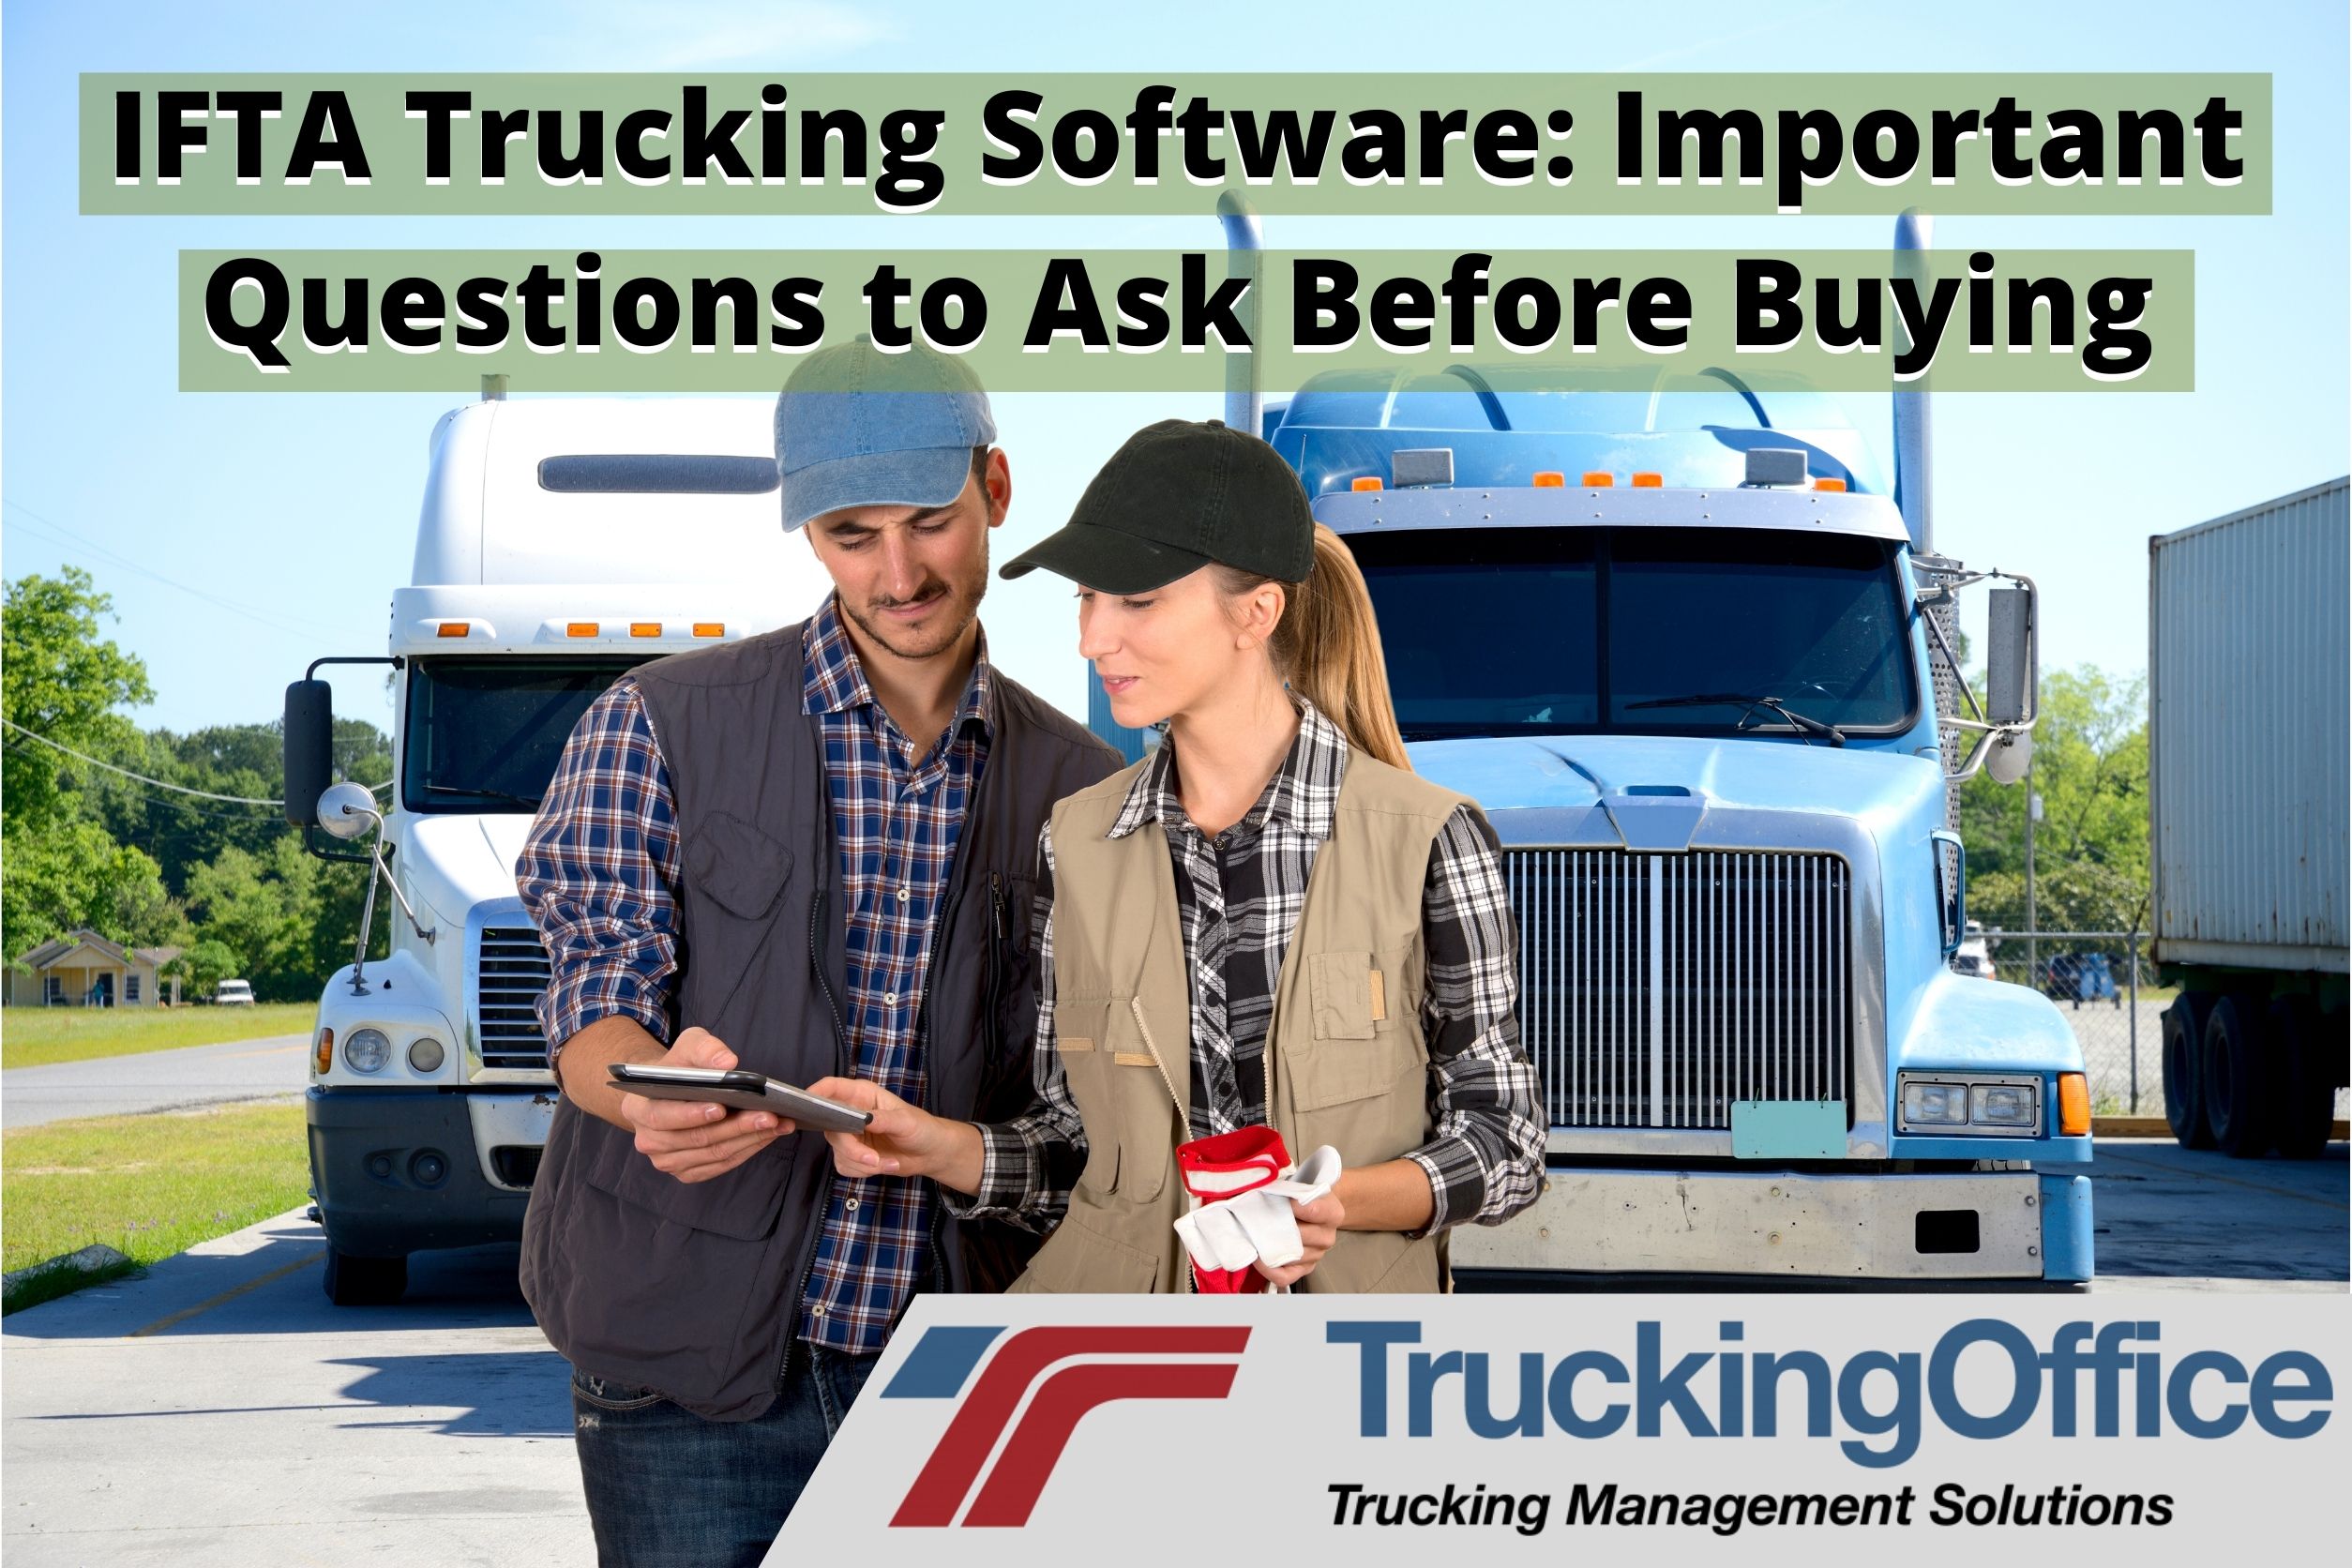 IFTA Trucking Software: Important Questions to Ask Before Buying